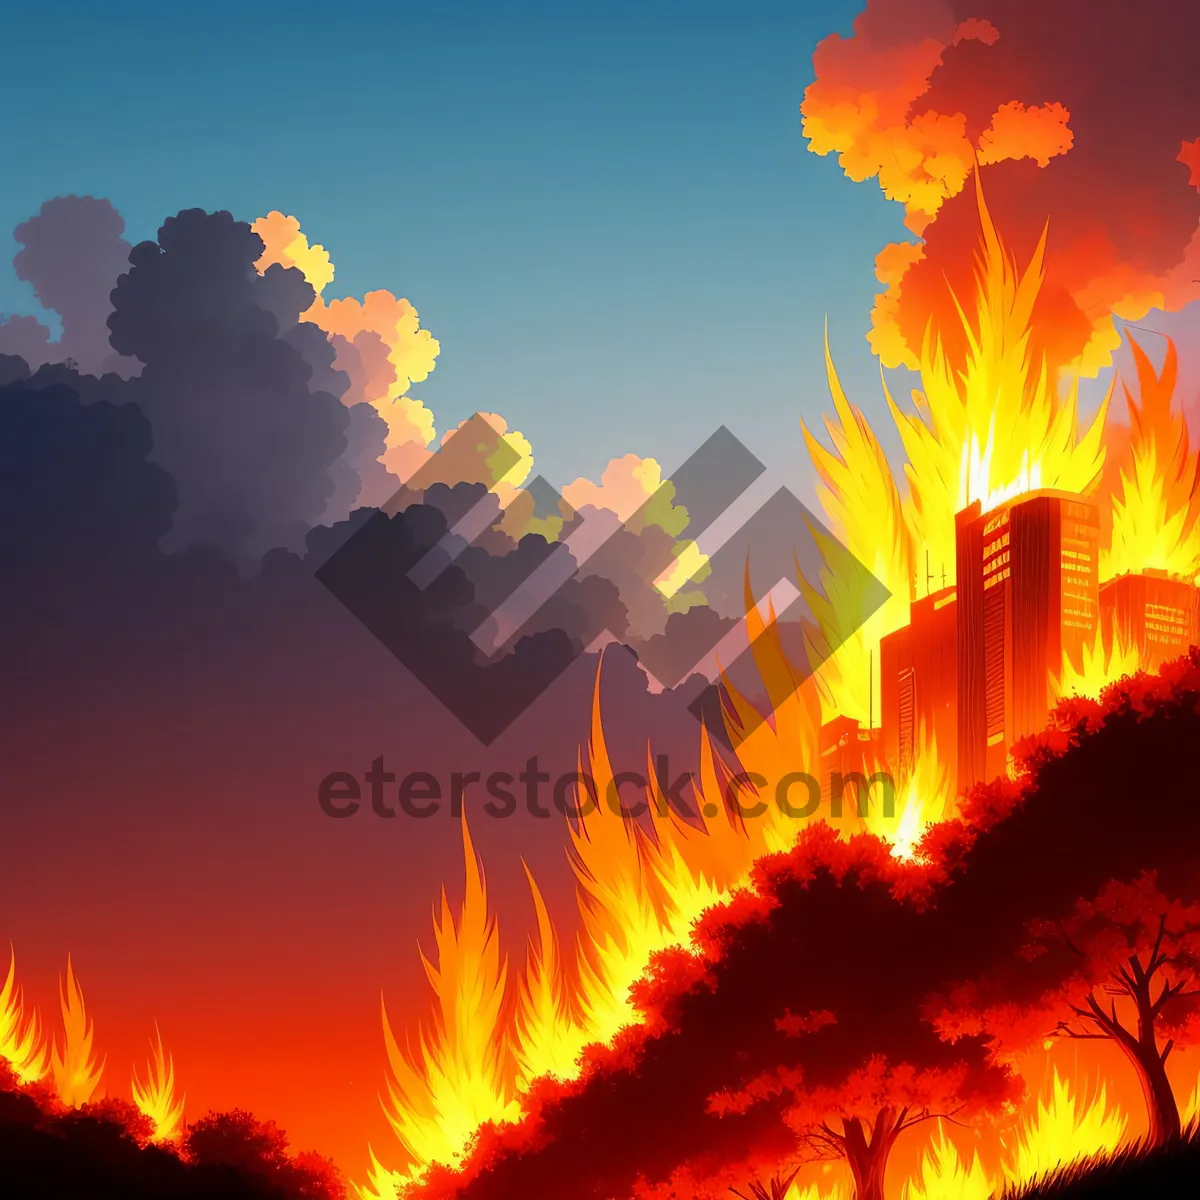 Picture of Fiery Sunset Sky Over Landscape